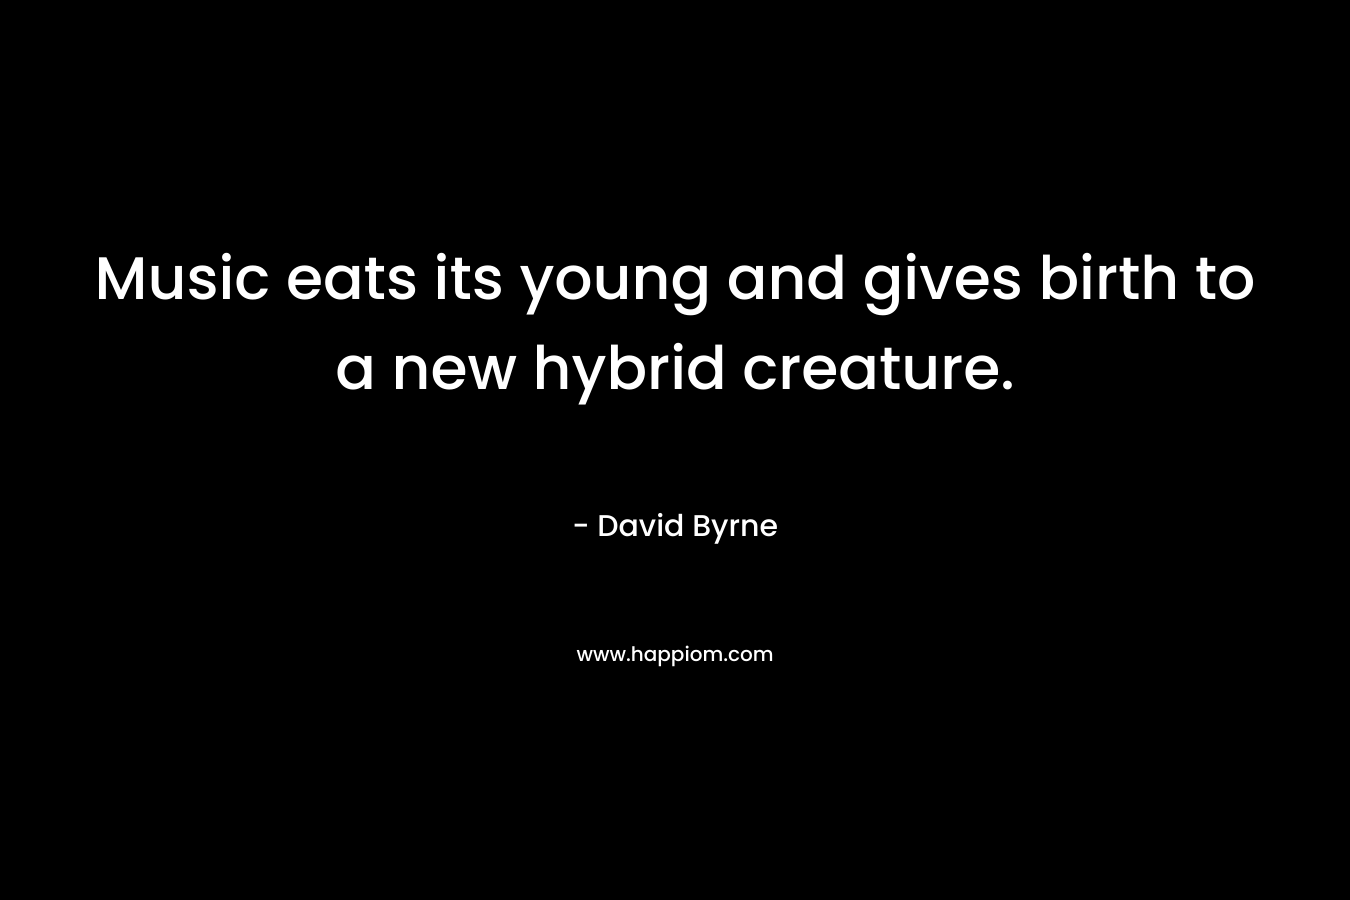 Music eats its young and gives birth to a new hybrid creature. – David Byrne